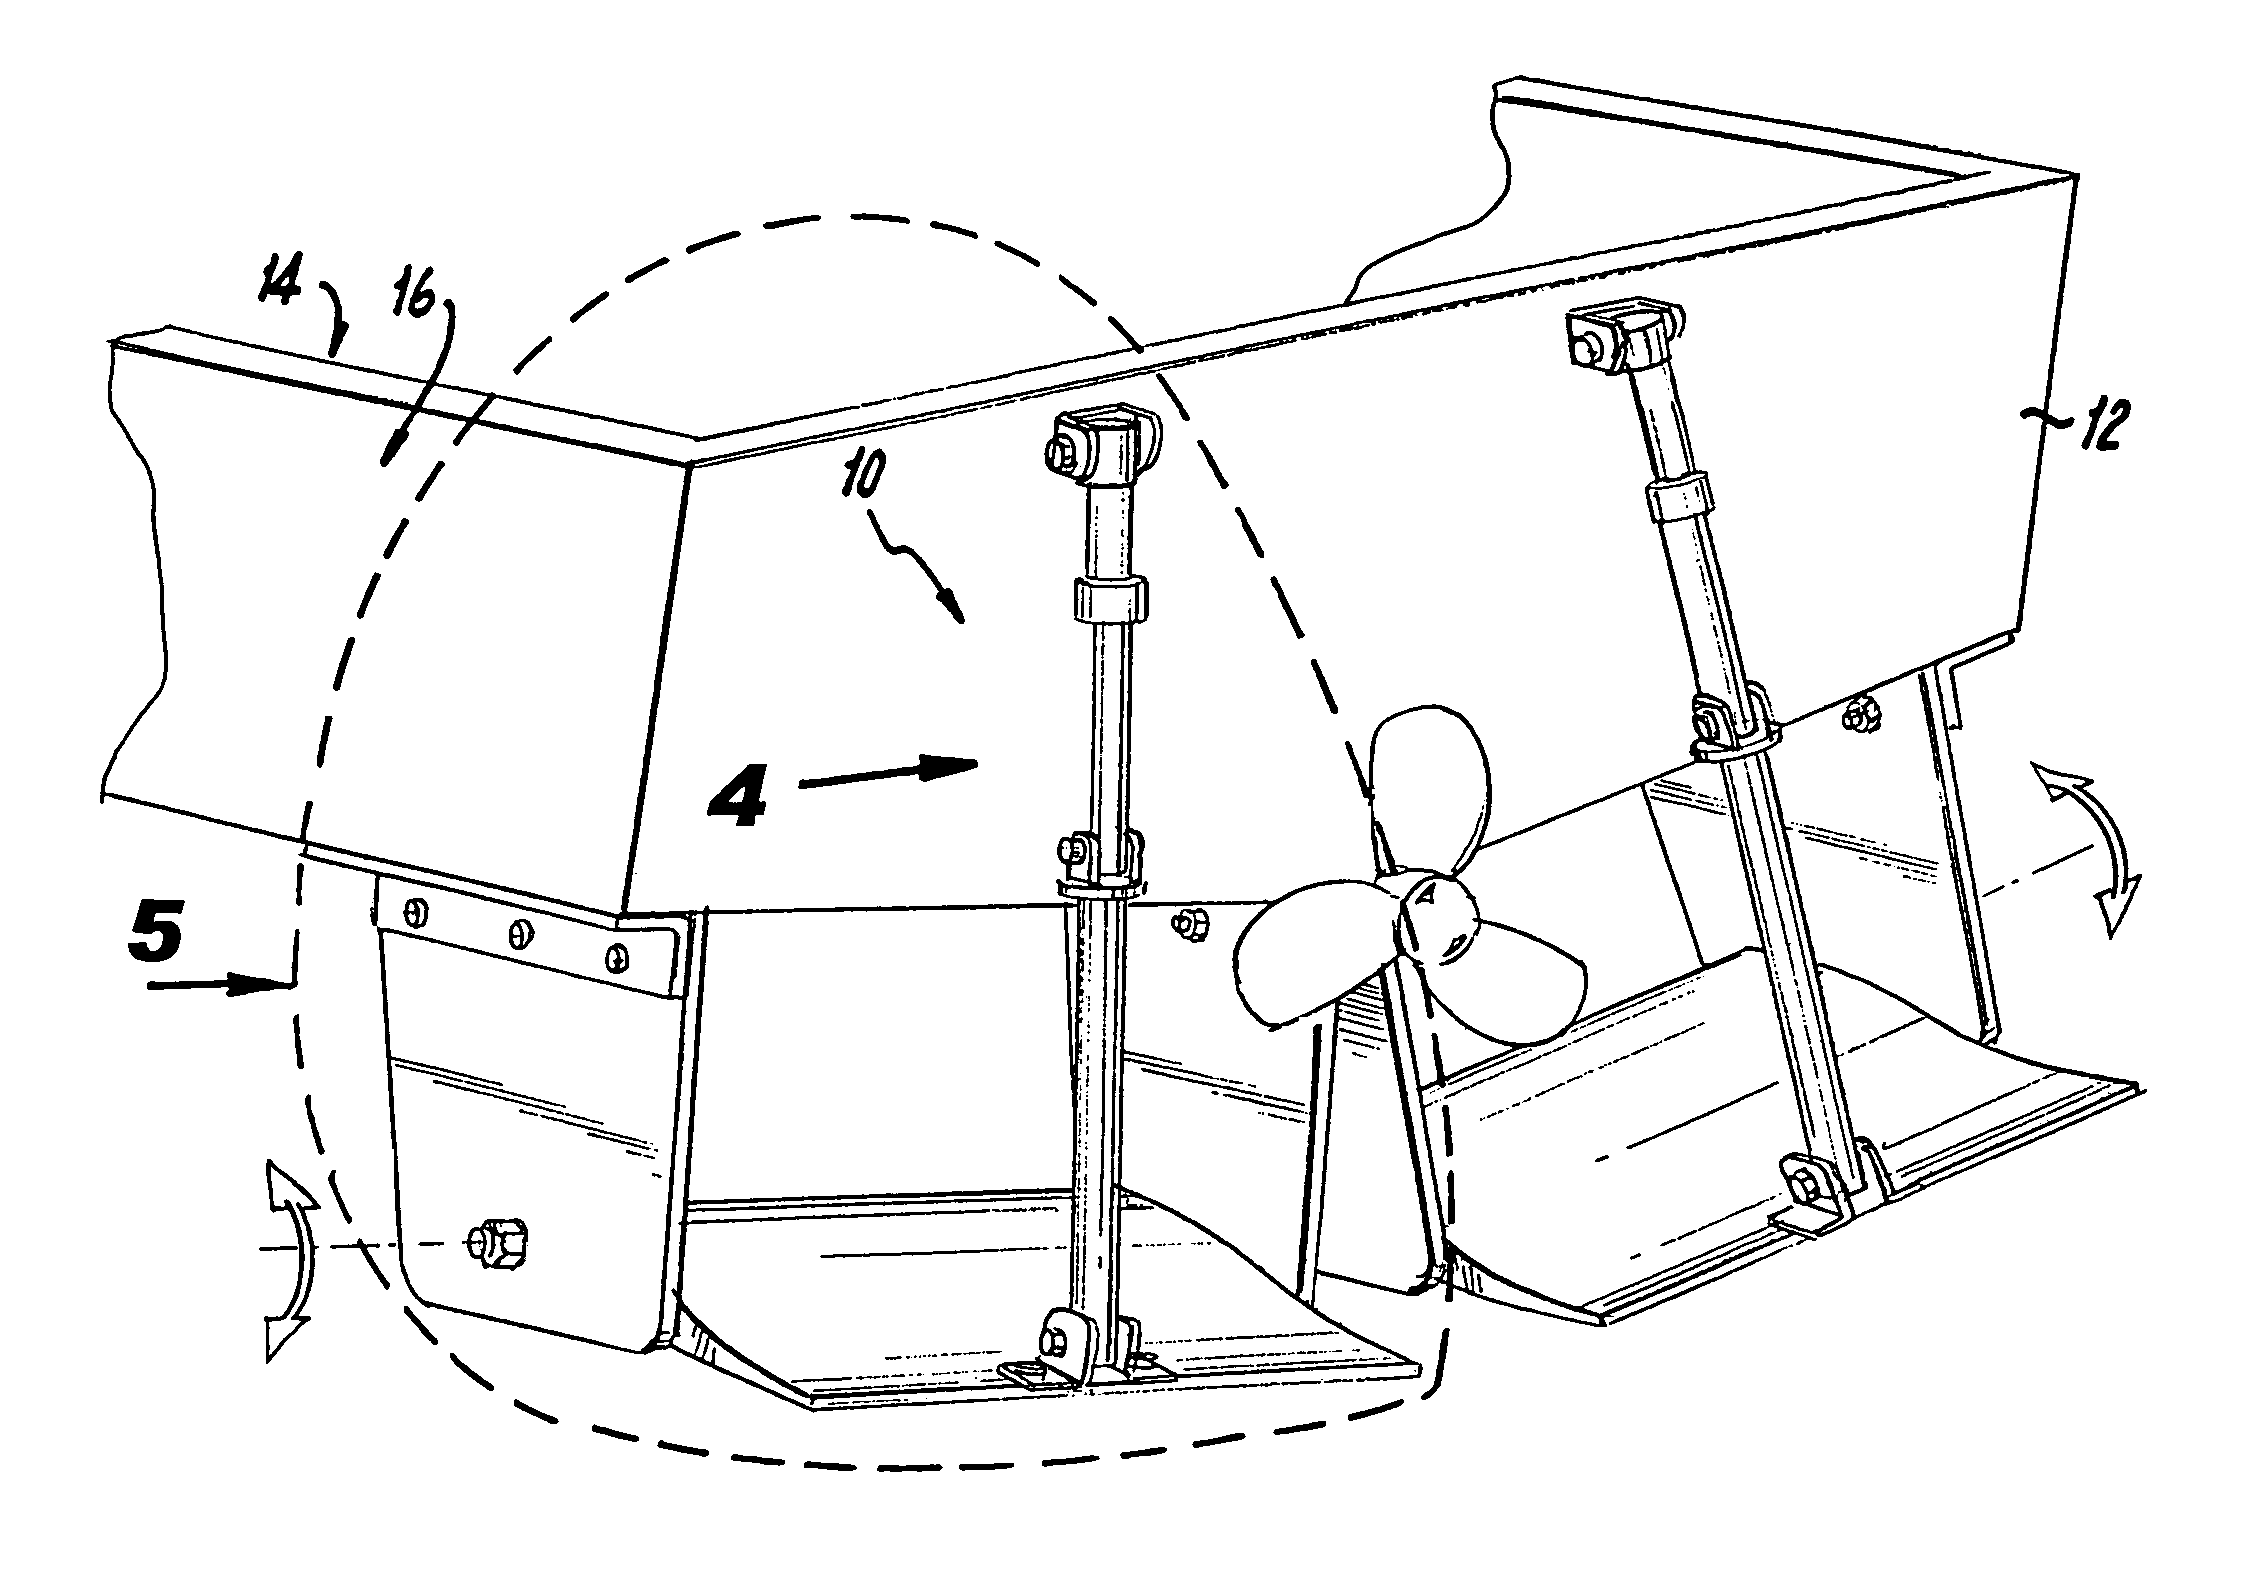 Hydrofoil unit for attaching to the stern of the hull of a boat